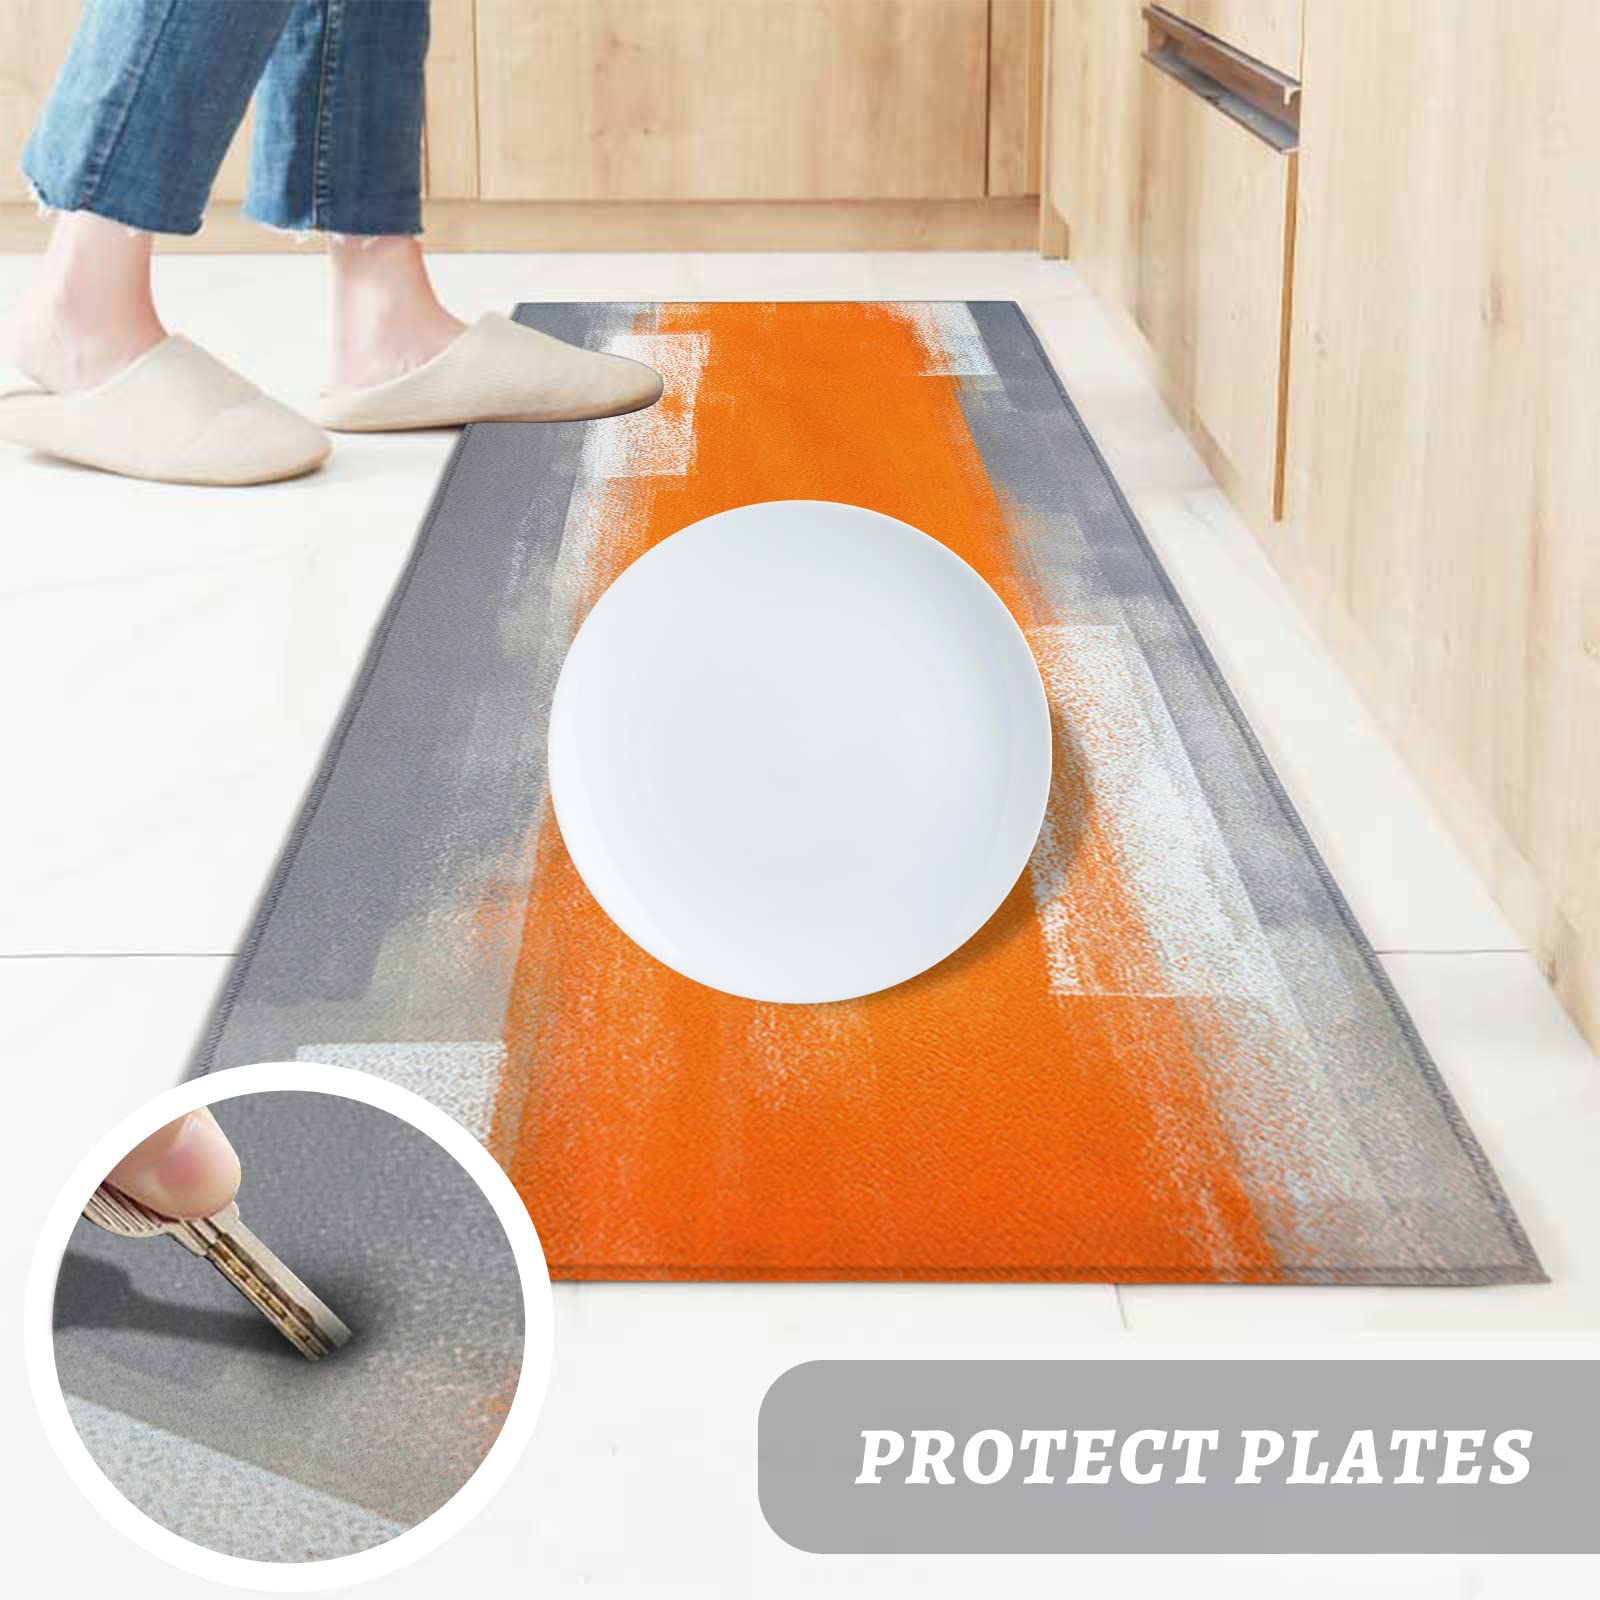 LooPoP Abstract Art Kitchen Mats for Floor Cushioned Anti Fatigue 2 Piece Set Kitchen Runner Rugs Non Skid Washable Orange Grey Gradient Oil Painting 15.7x23.6+15.7x47.2inch